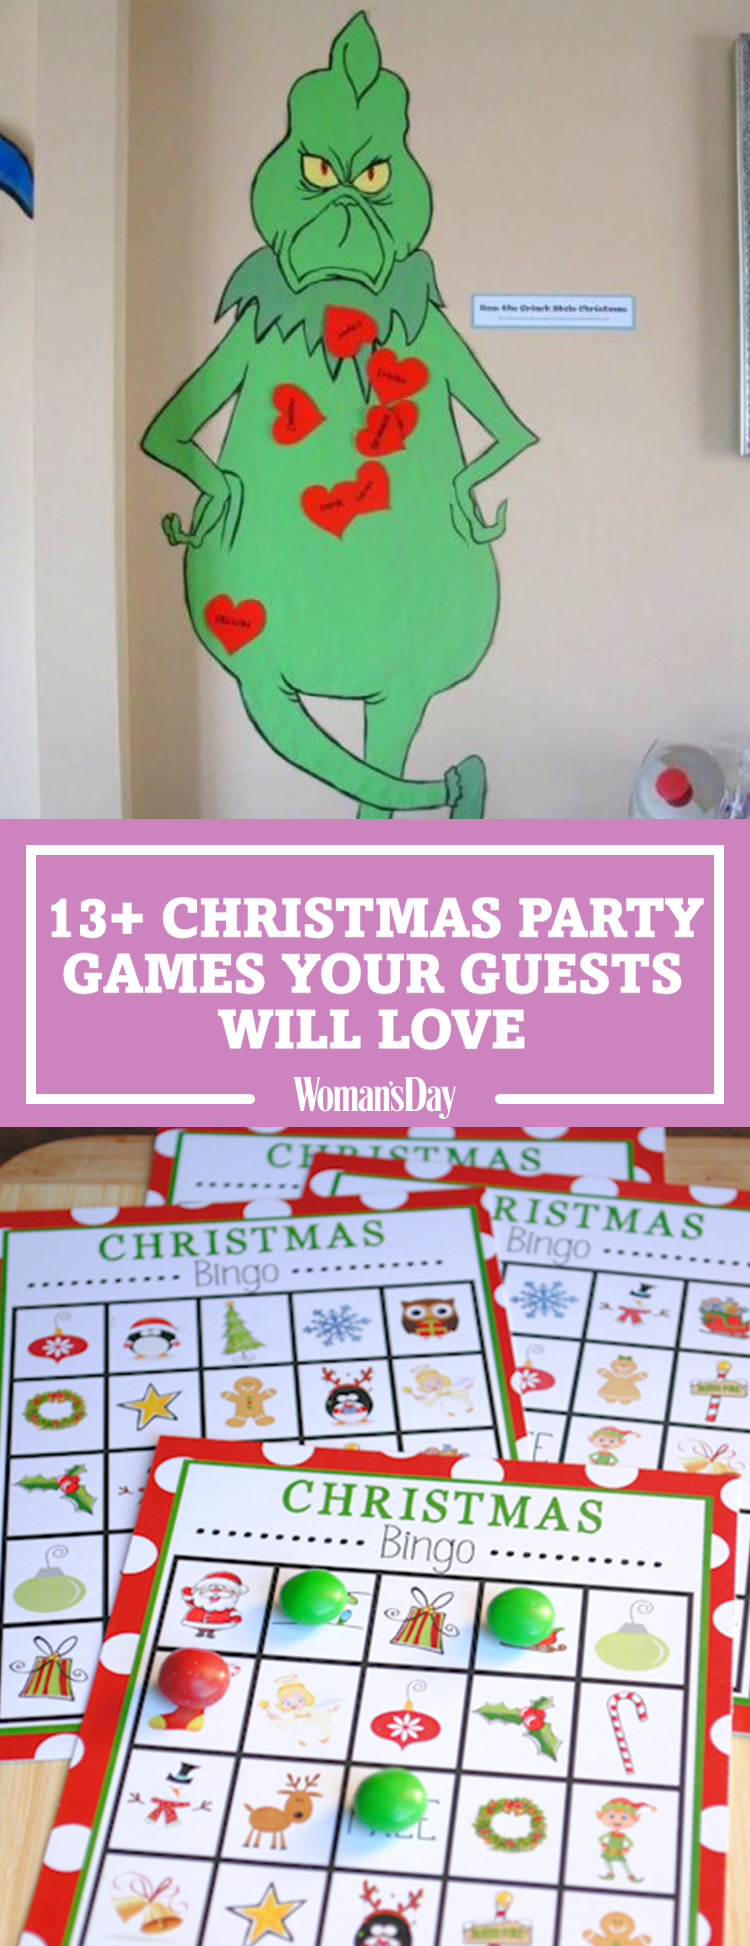 Work Holiday Party Game Ideas
 17 Fun Christmas Party Games for Kids DIY Holiday Party